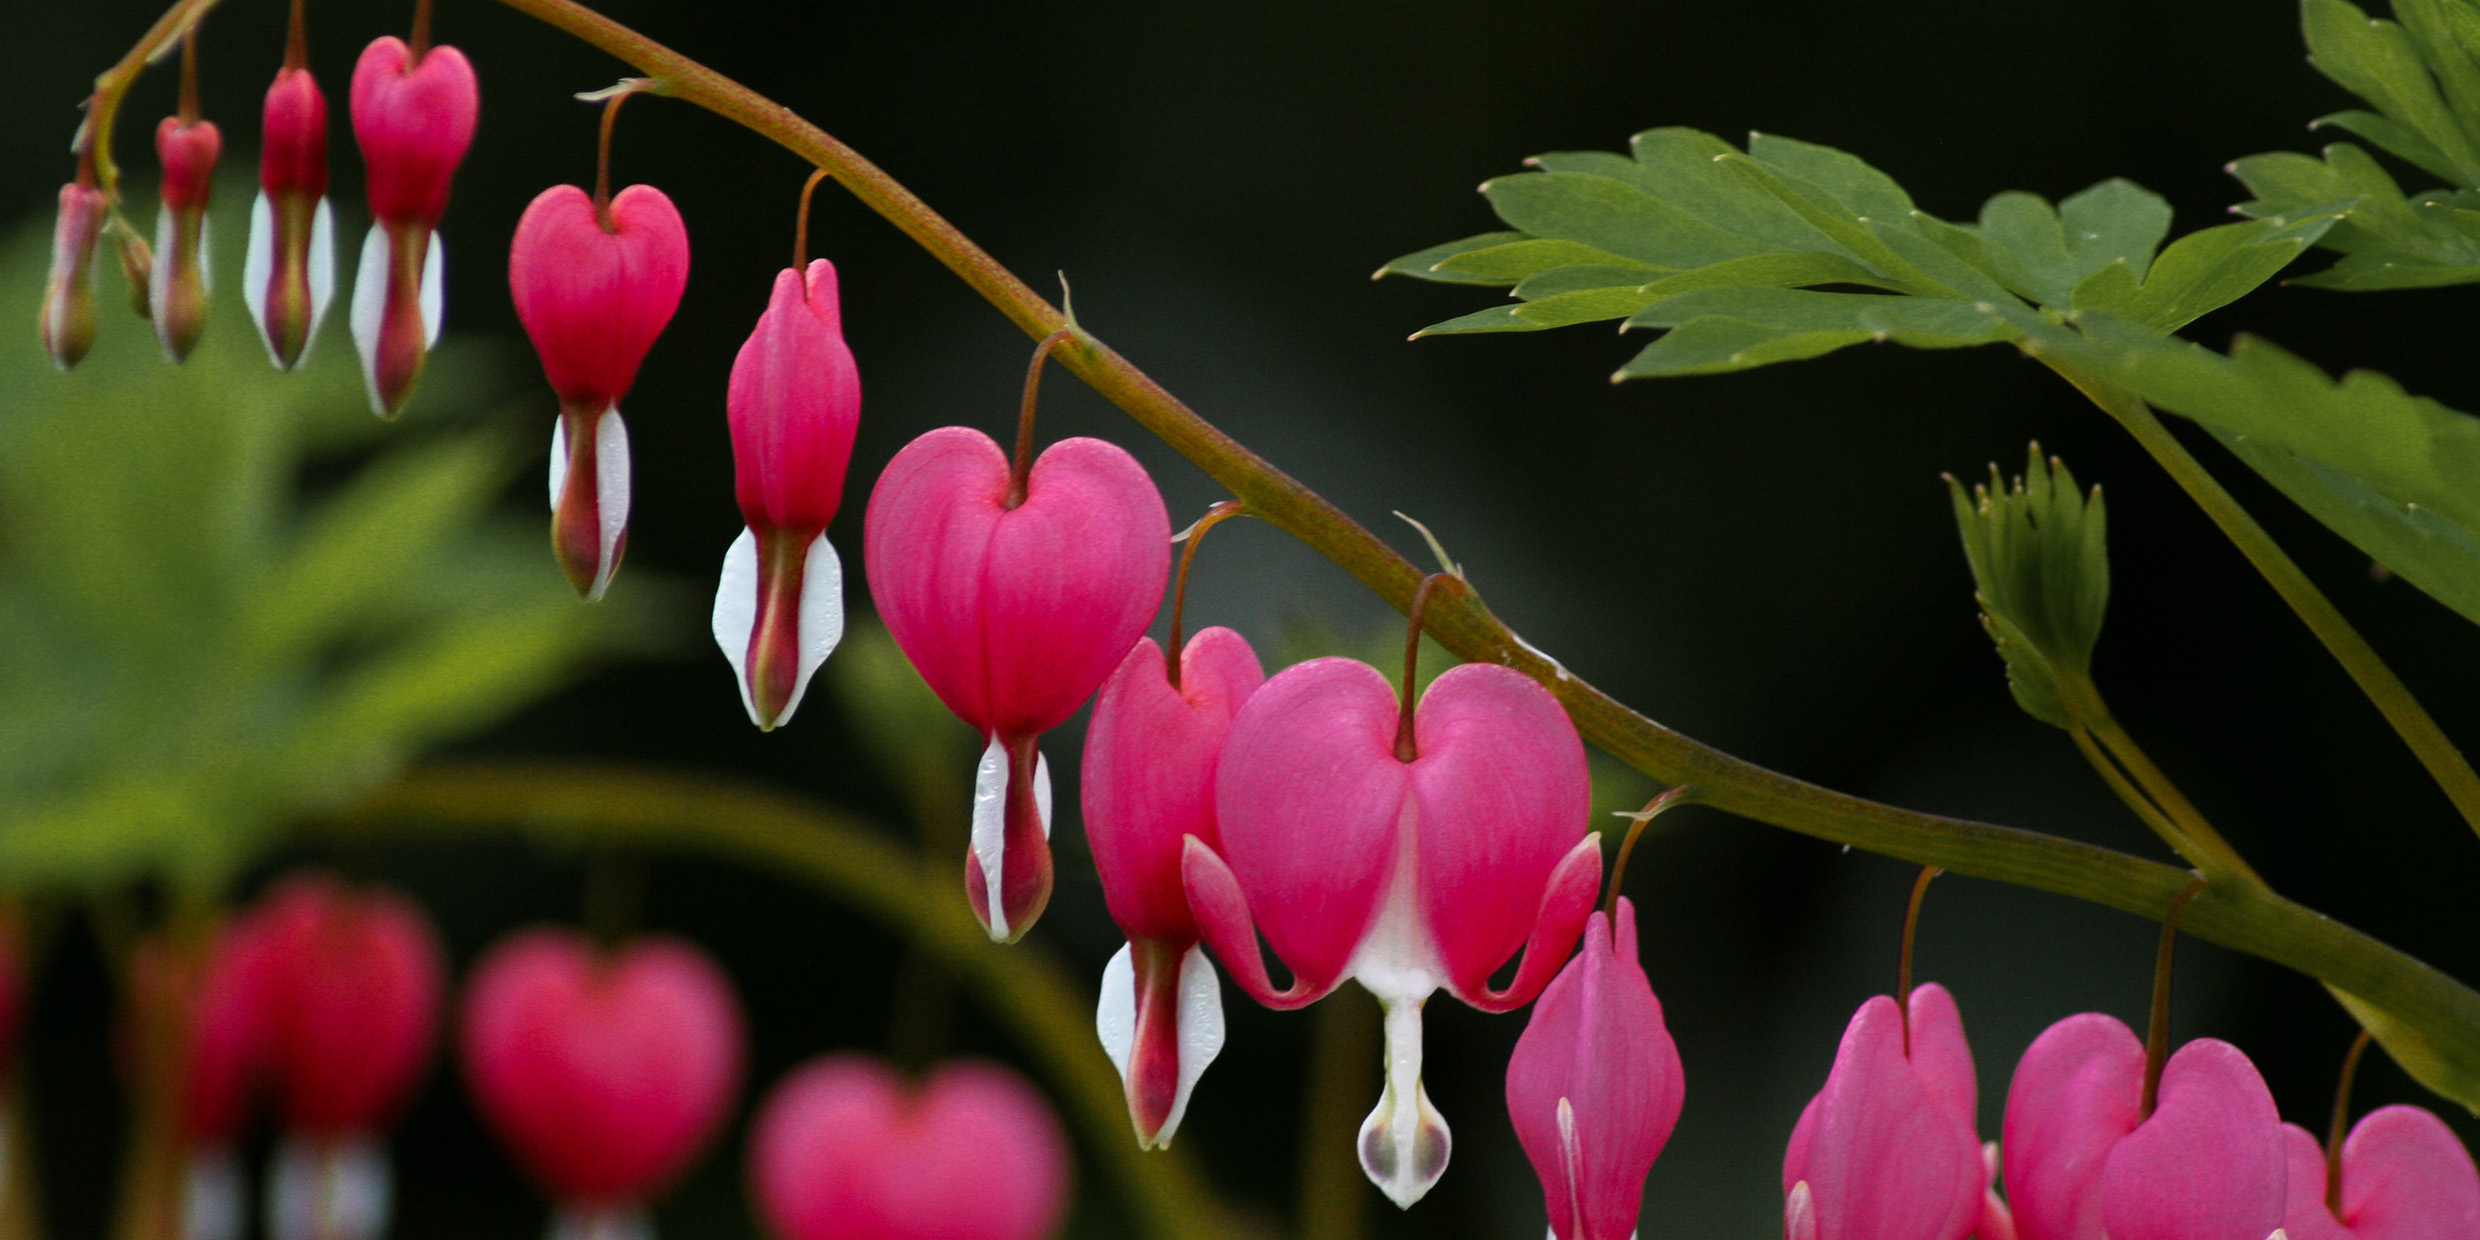 Image of the heart-shaped blossoms of the bleeding-heart flower